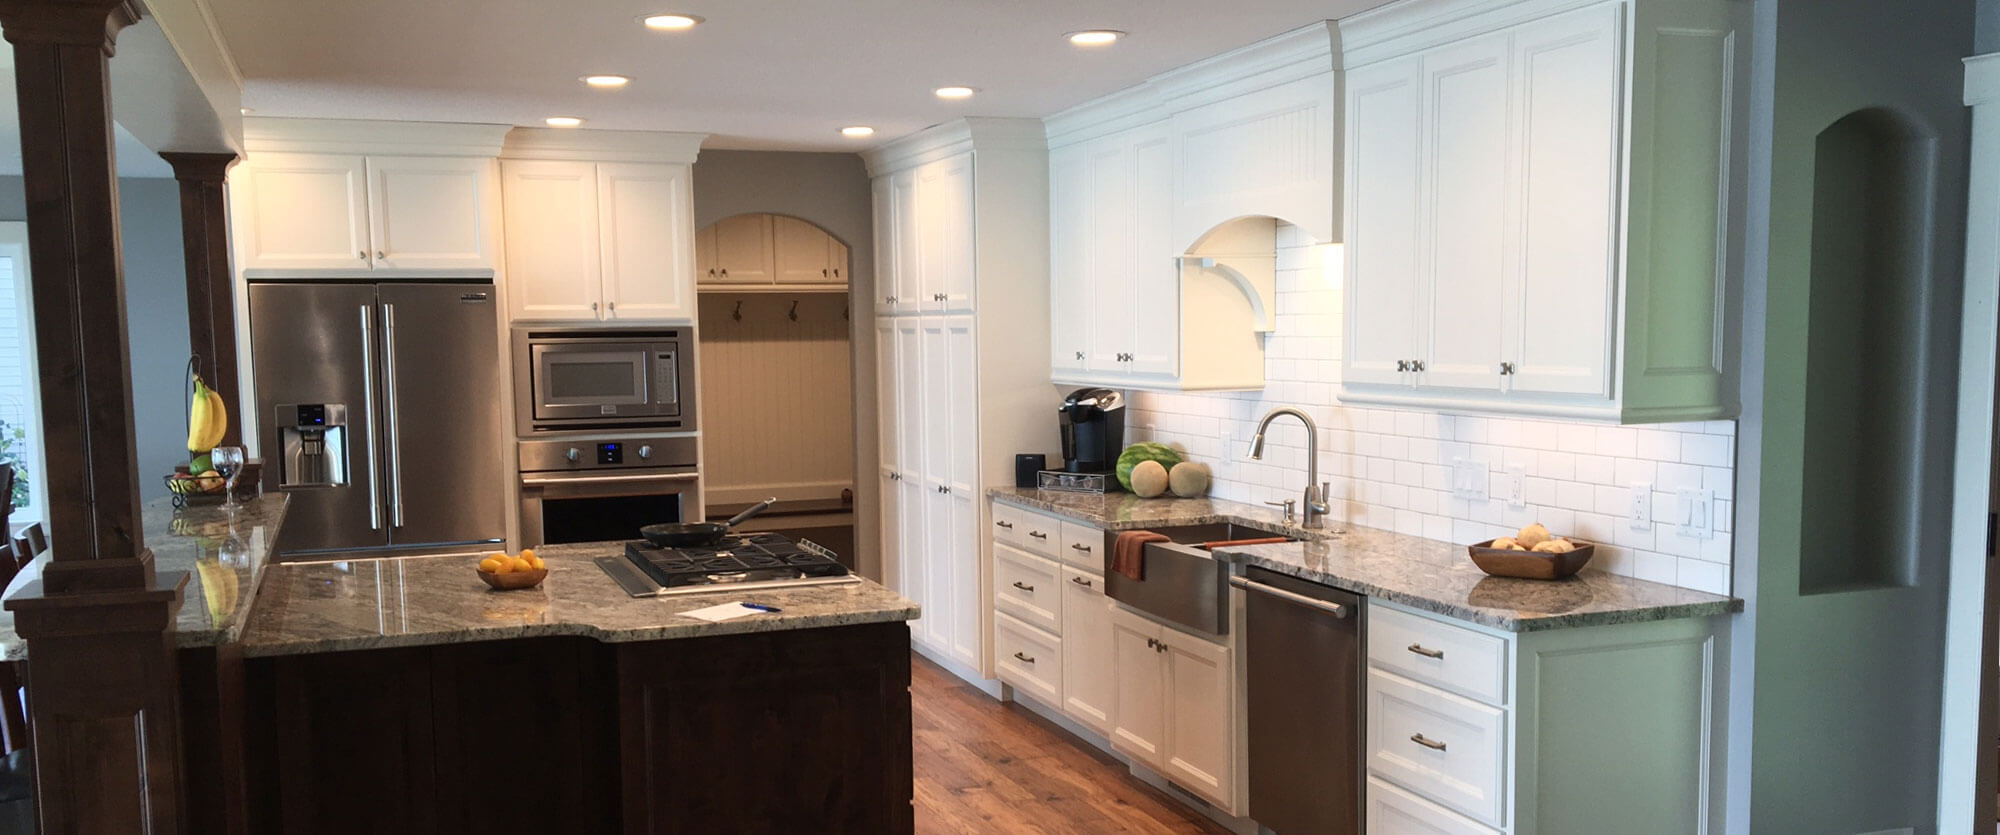 Custom kitchen cabinets made of solid wood and painted white; designed, built, and installed by finewood Structures of Browerville, MN